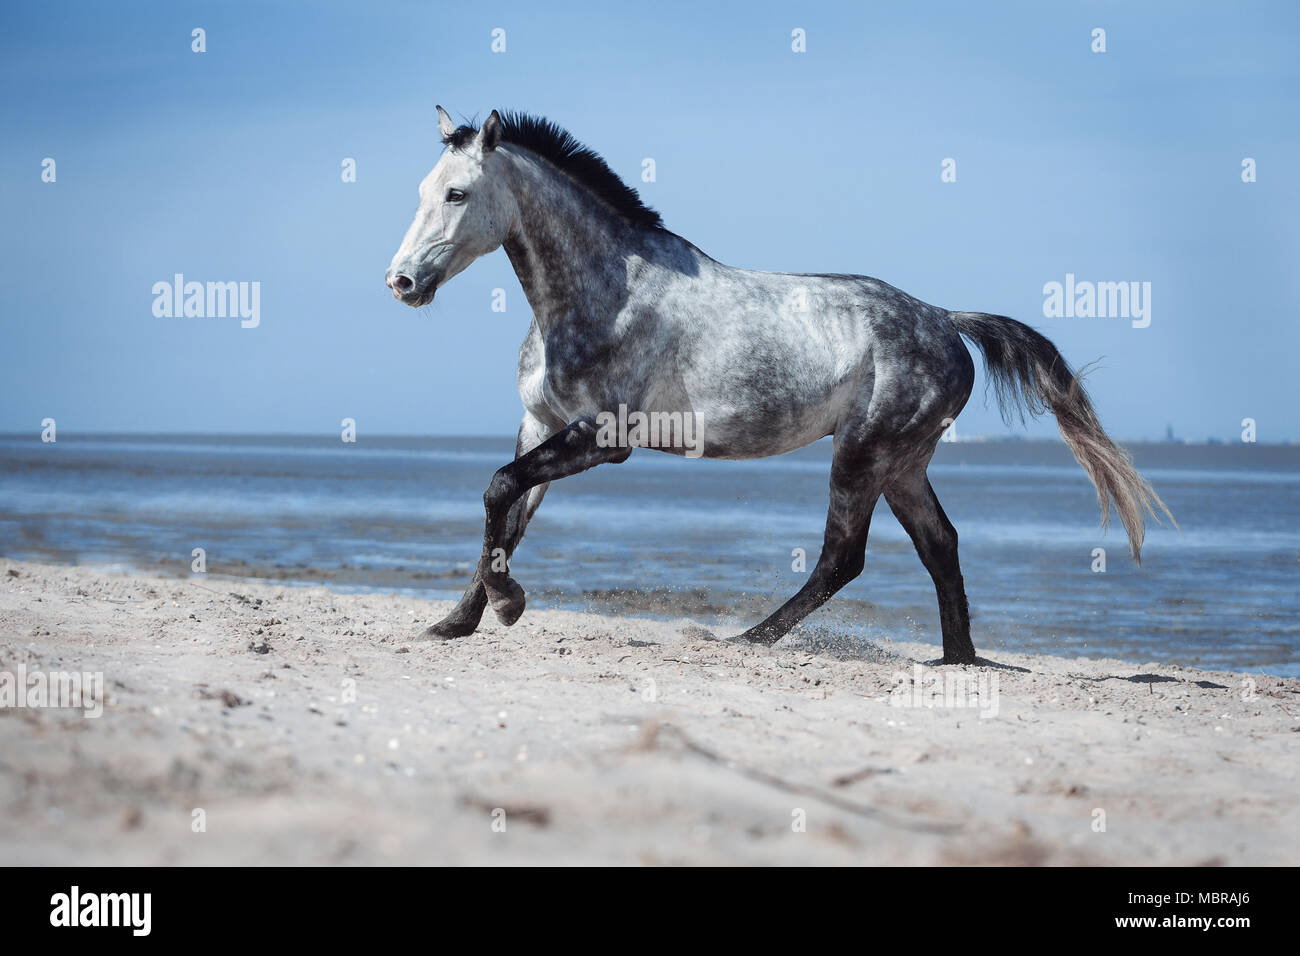 Mould, apple mould, warmblood horse galloping on the beach by the sea, Wangerland, Lower Saxony, Germany Stock Photo